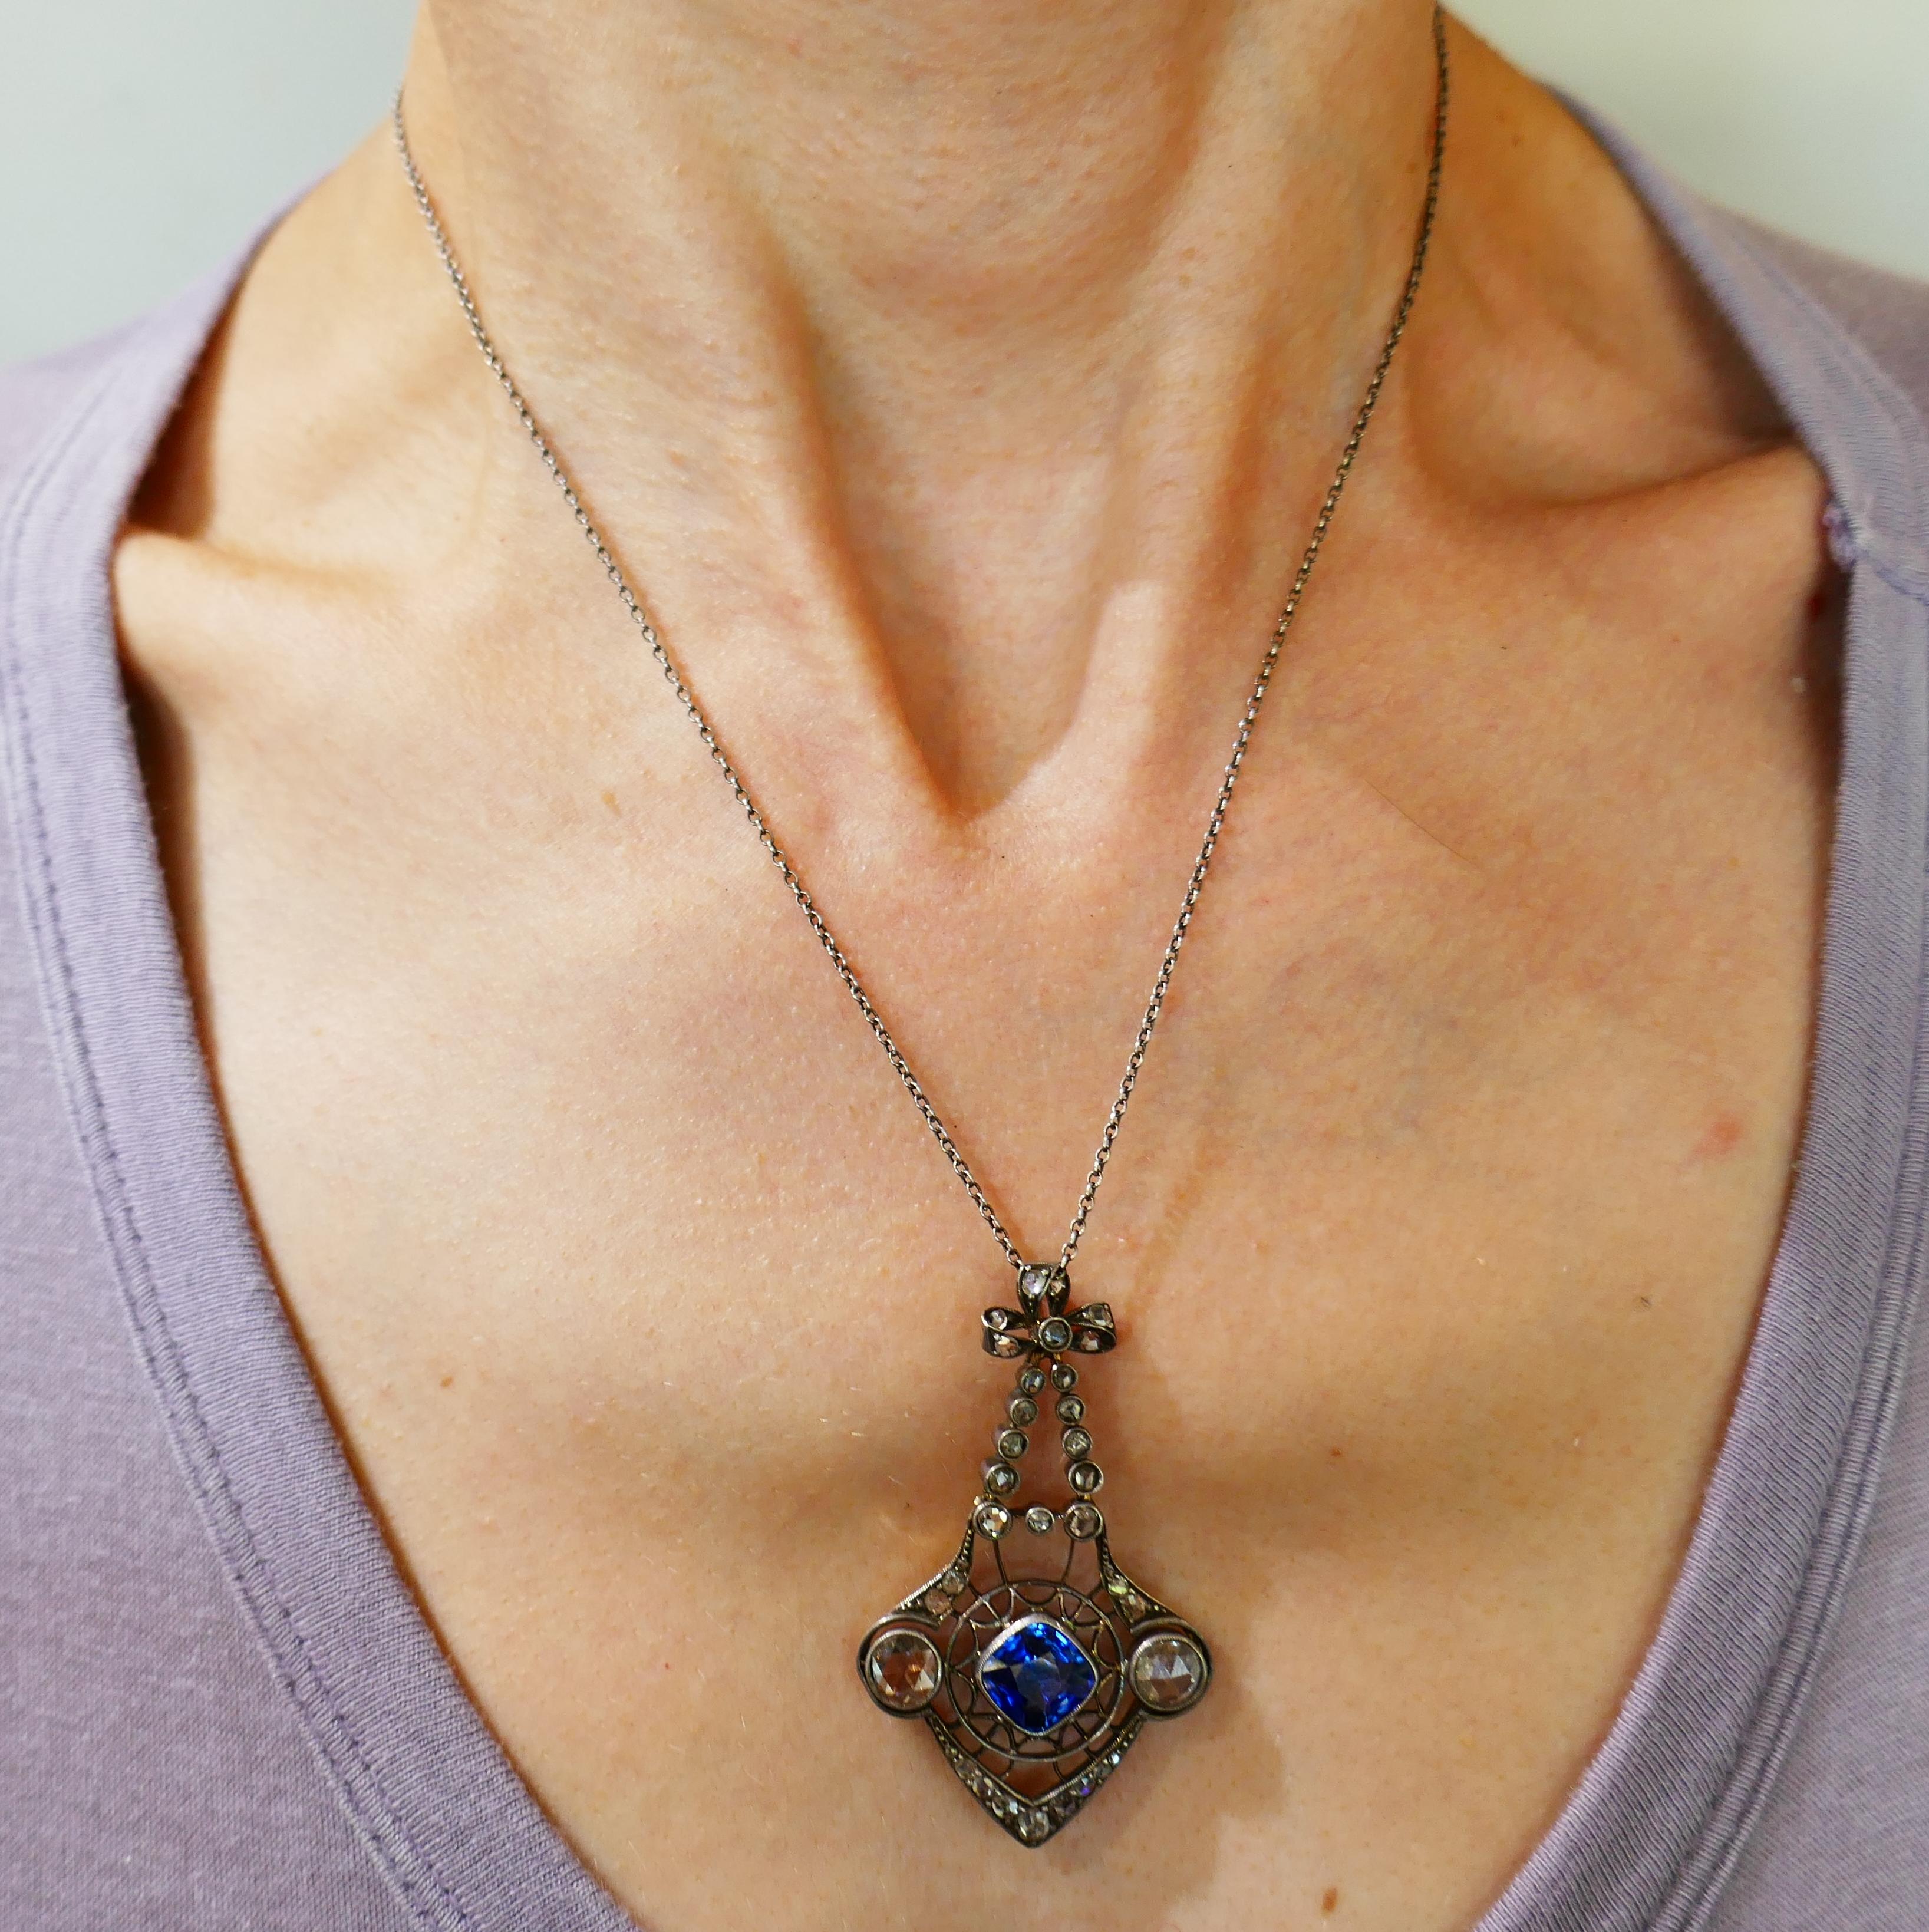 Beautiful Victorian pendant necklace. Trendy and wearable, the necklace is a great addition to your jewelry collection.
Made of silver and 14 karat (tested) yellow gold, the pendant features a cushion cut sapphire and rose cut diamonds. The sapphire